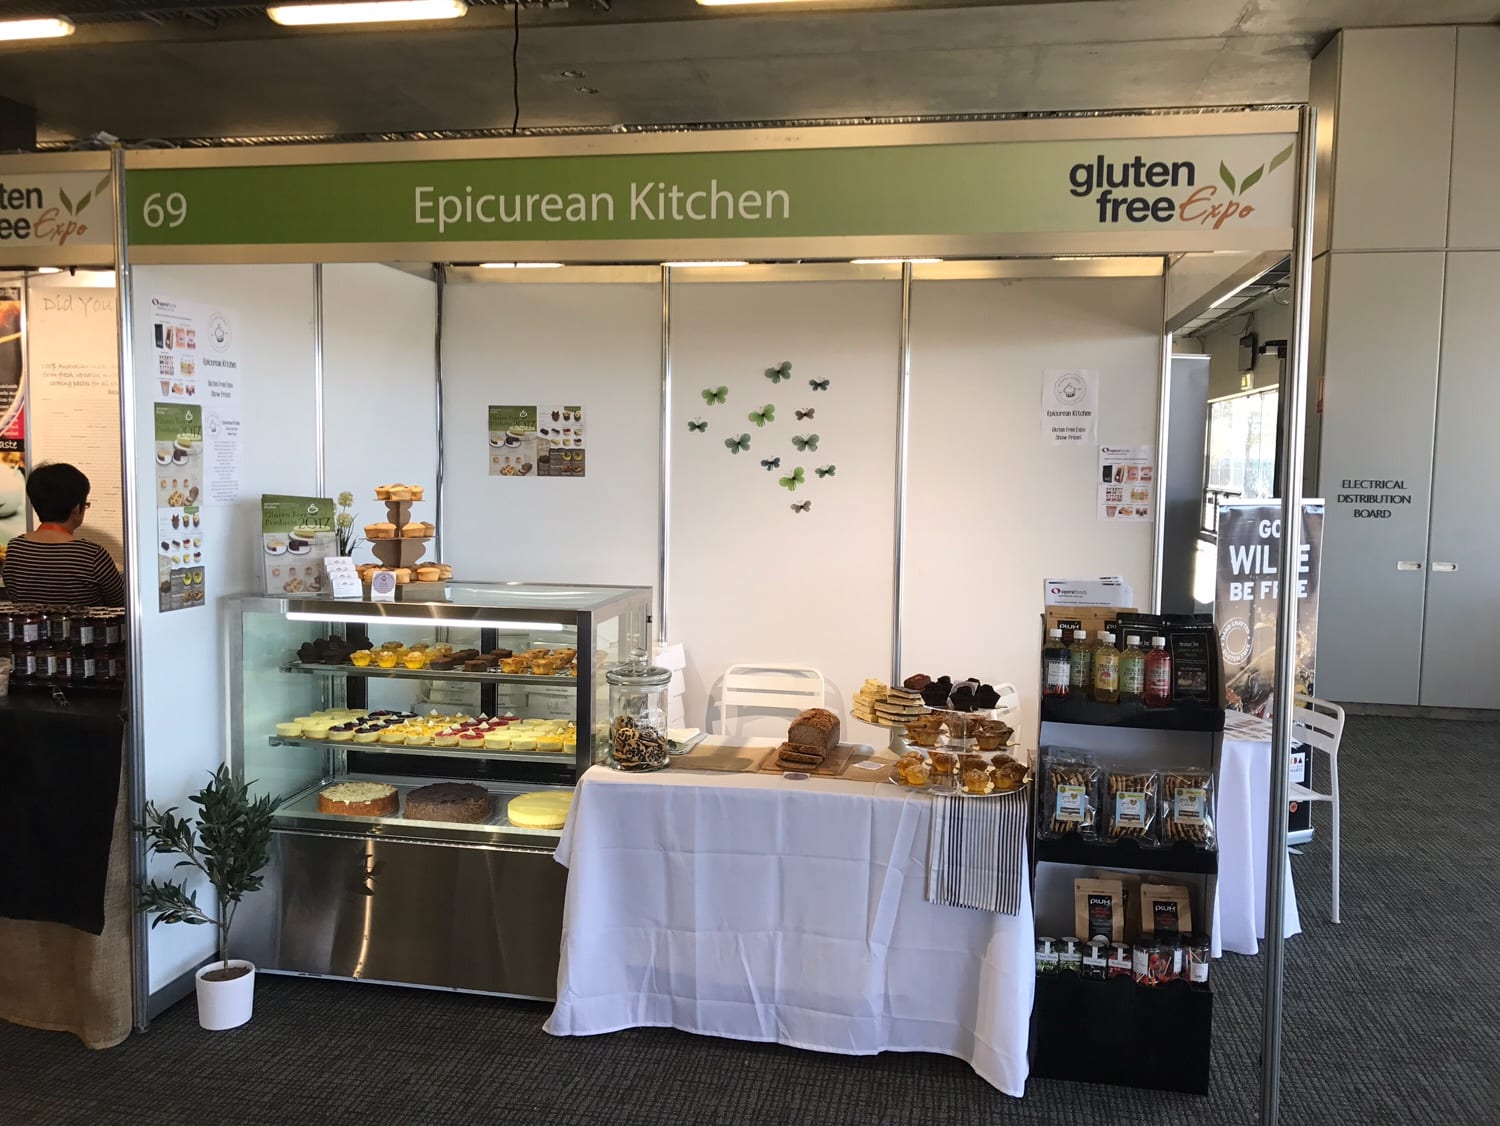 Opera Foods Exhibiting at the gluten free expo with Epicurean Kitchen